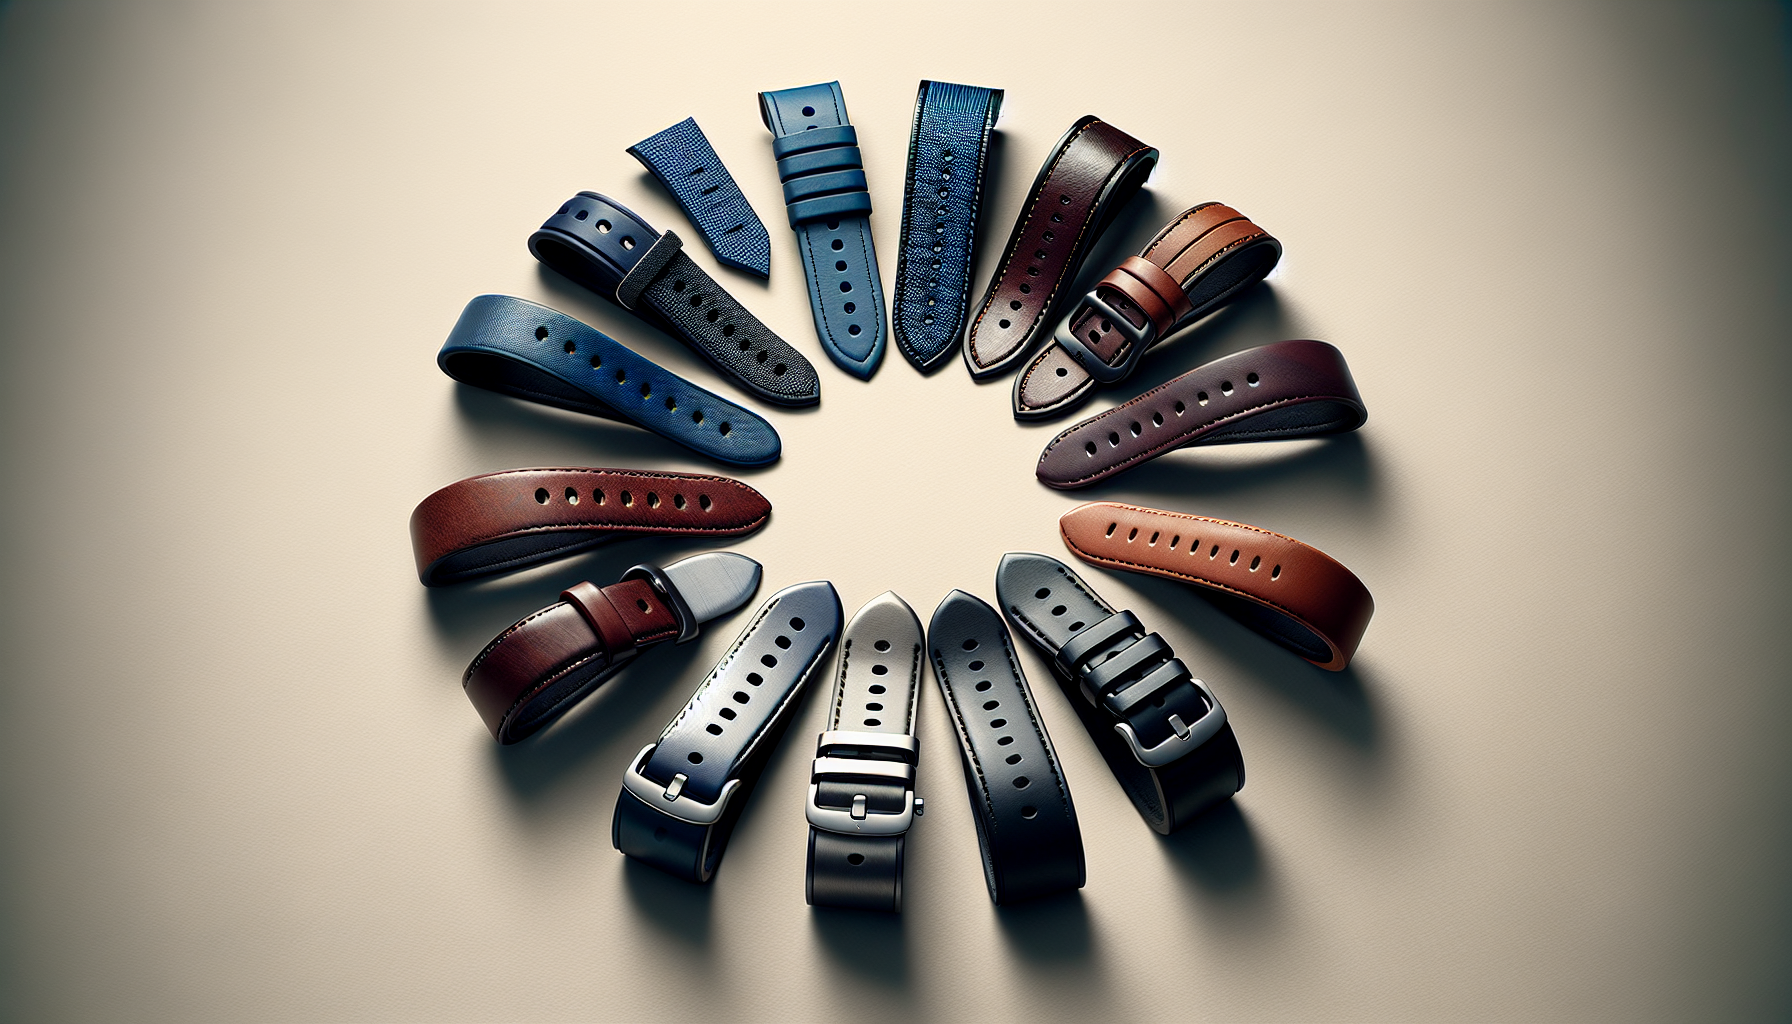 A variety of 16mm watch bands including leather, nylon, and metal options